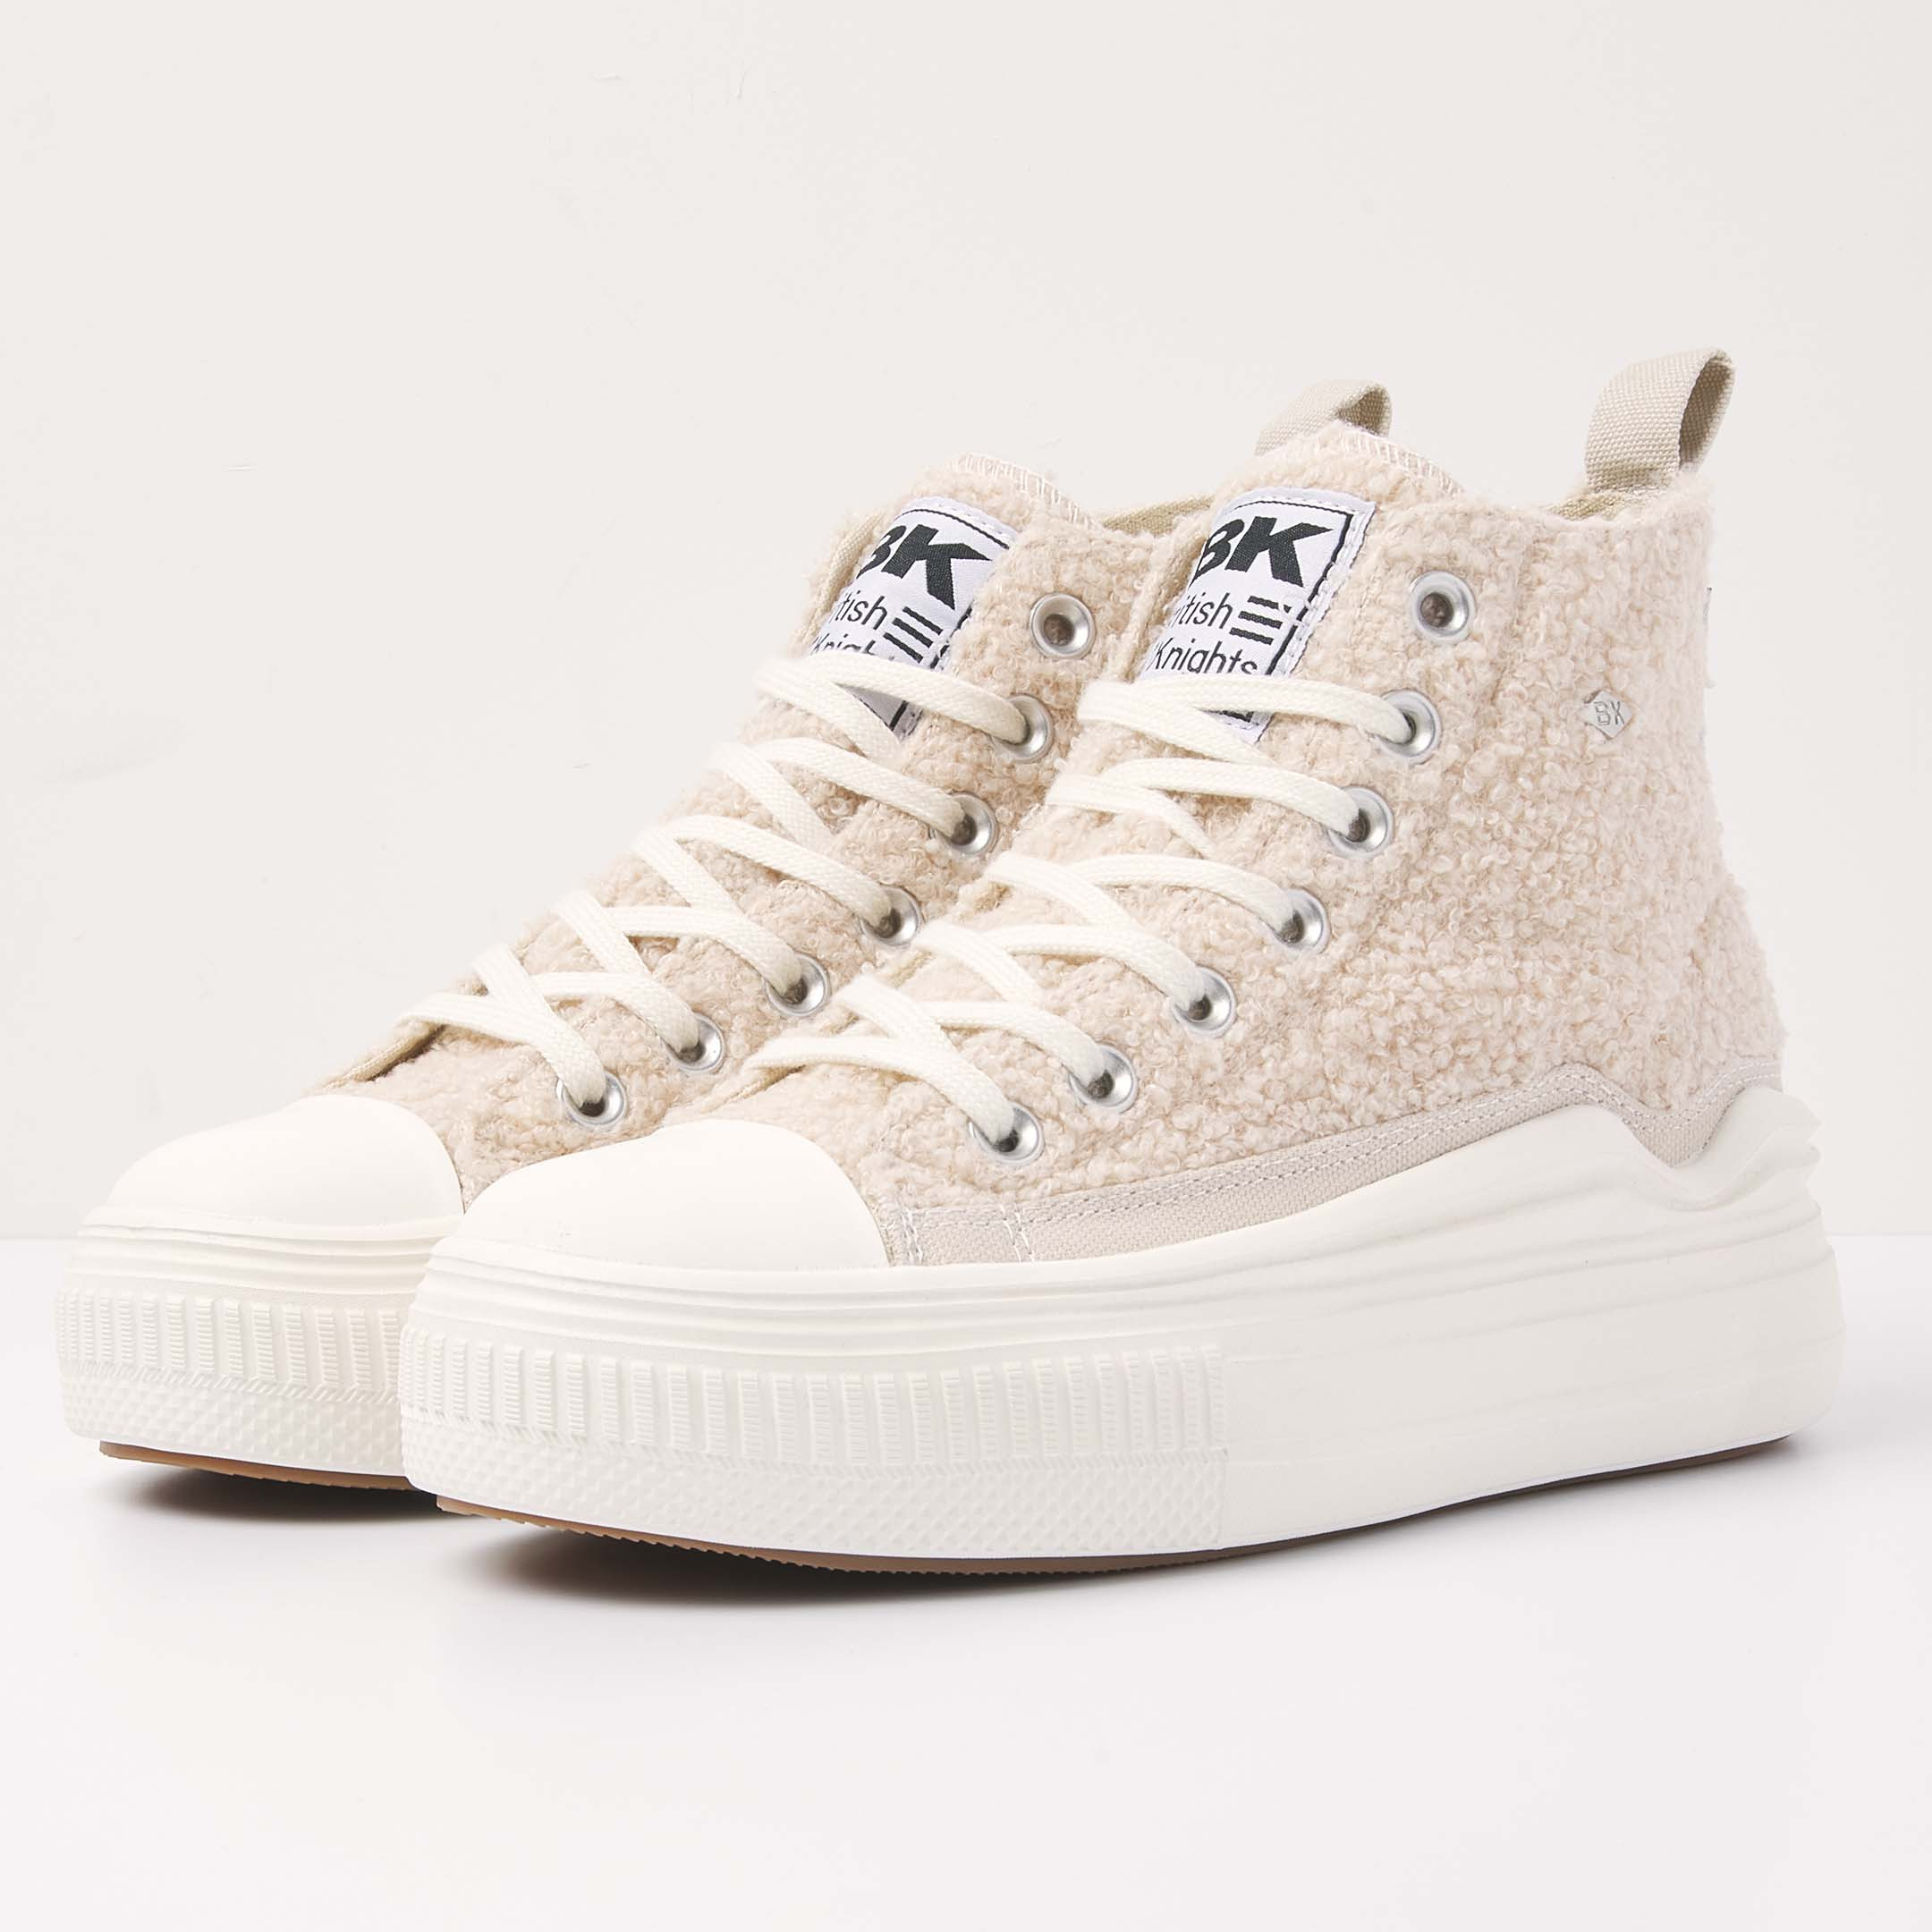 British Knights Sneaker Front view  B52-3732-01 KAYA FLOW MID HIGH-TOP FEMALE